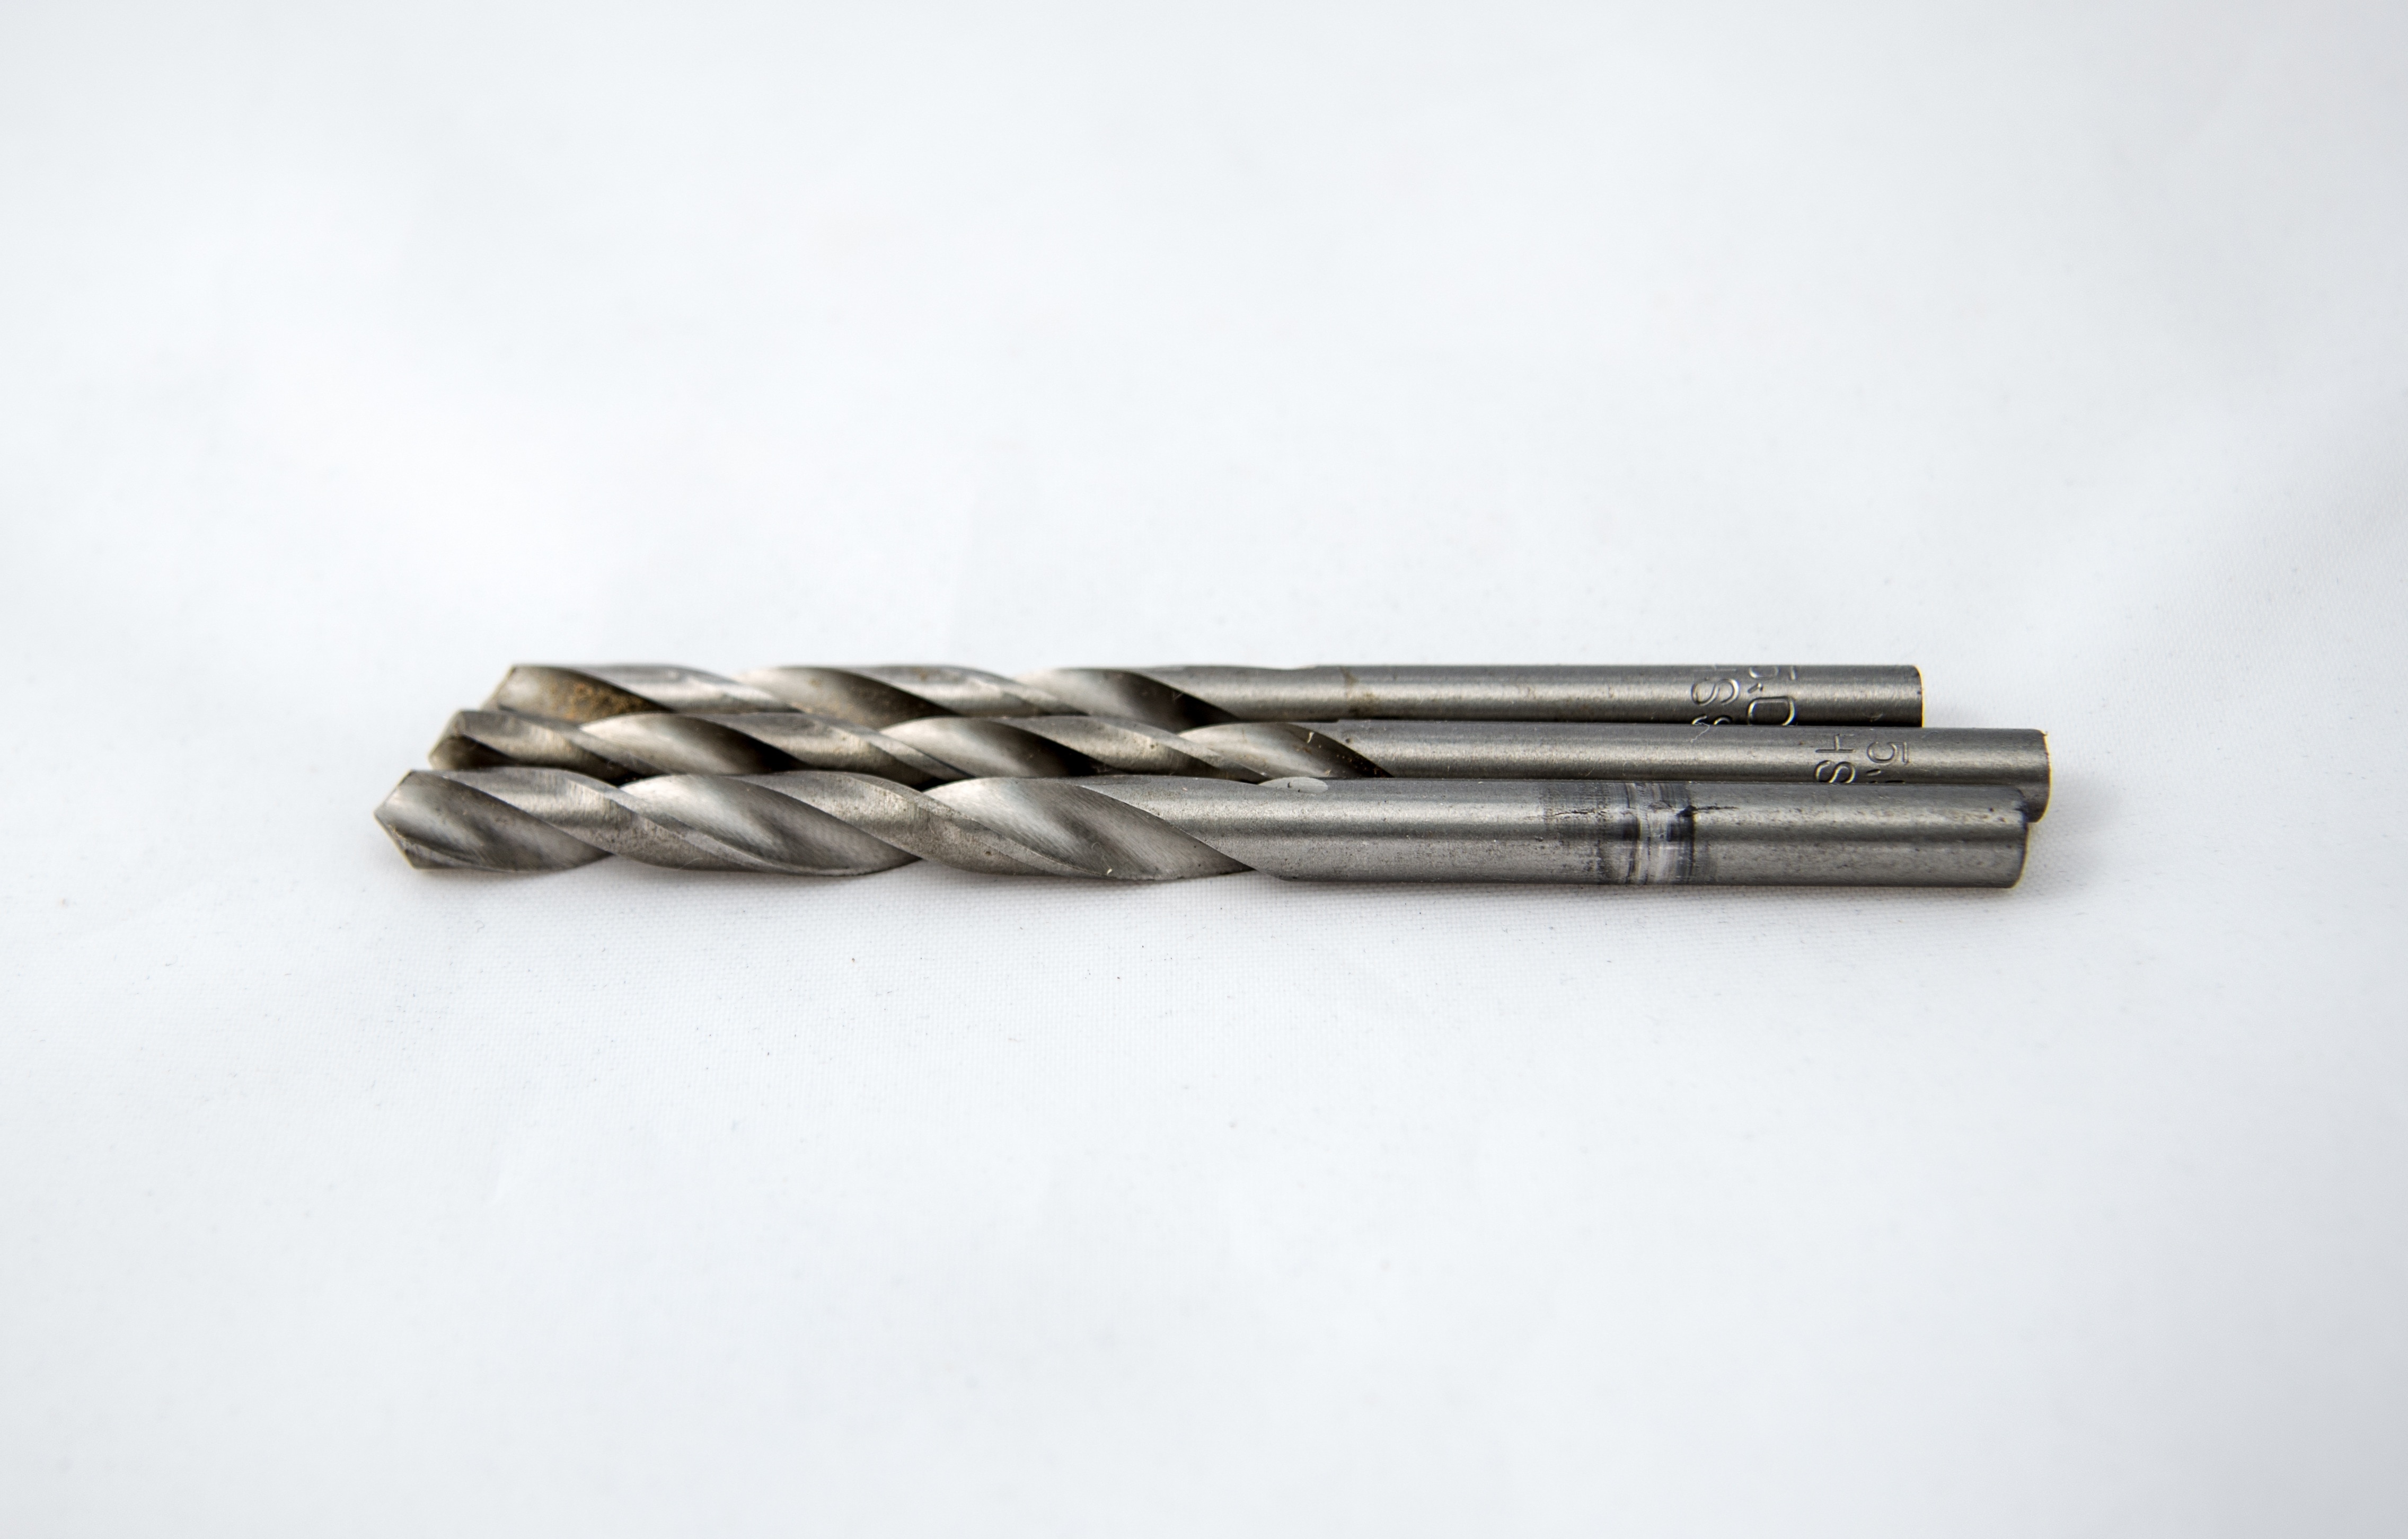 3 stainless steel drill bits